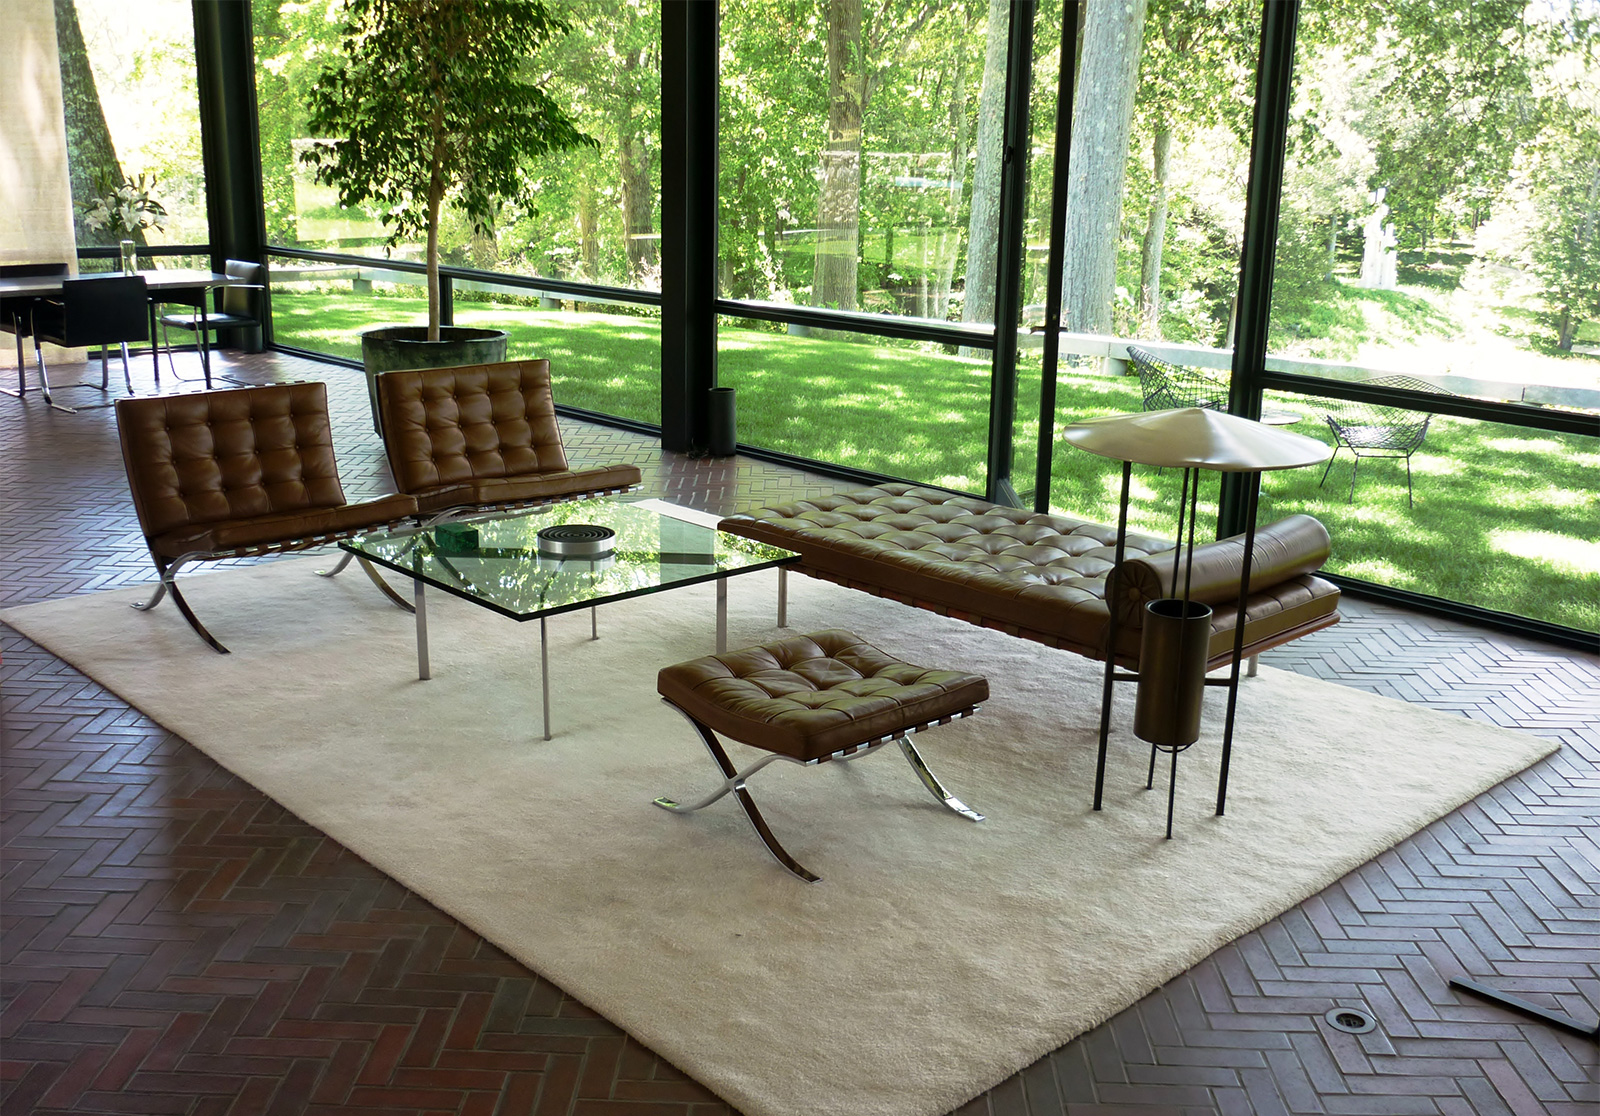 Smarten Up Johnson seating area mies daybed.jpg